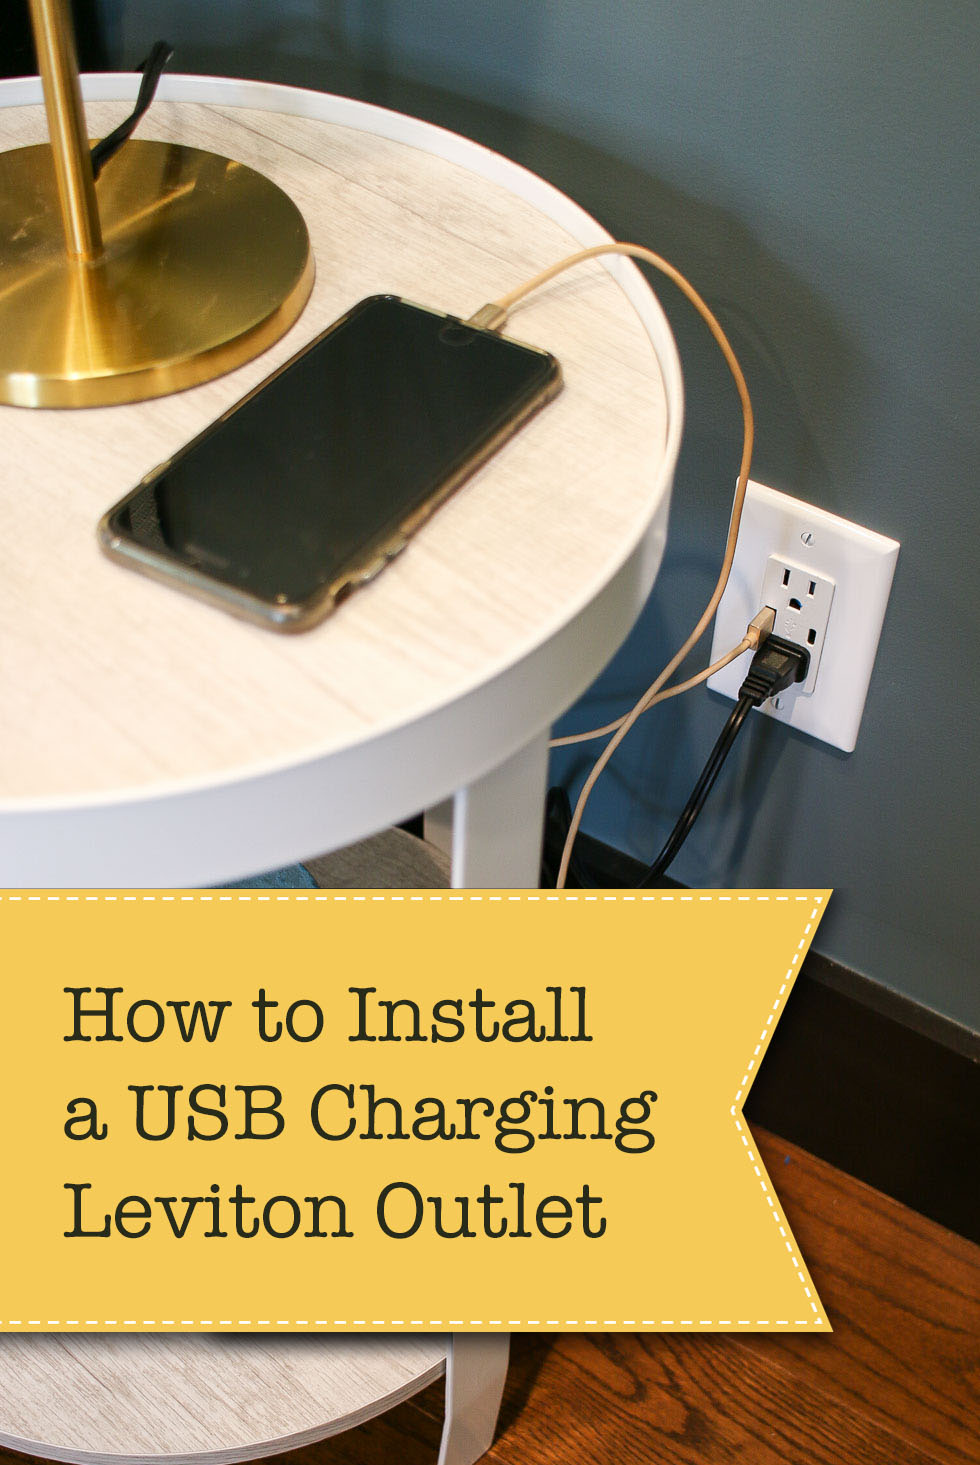 How to Install USB Charging Outlets